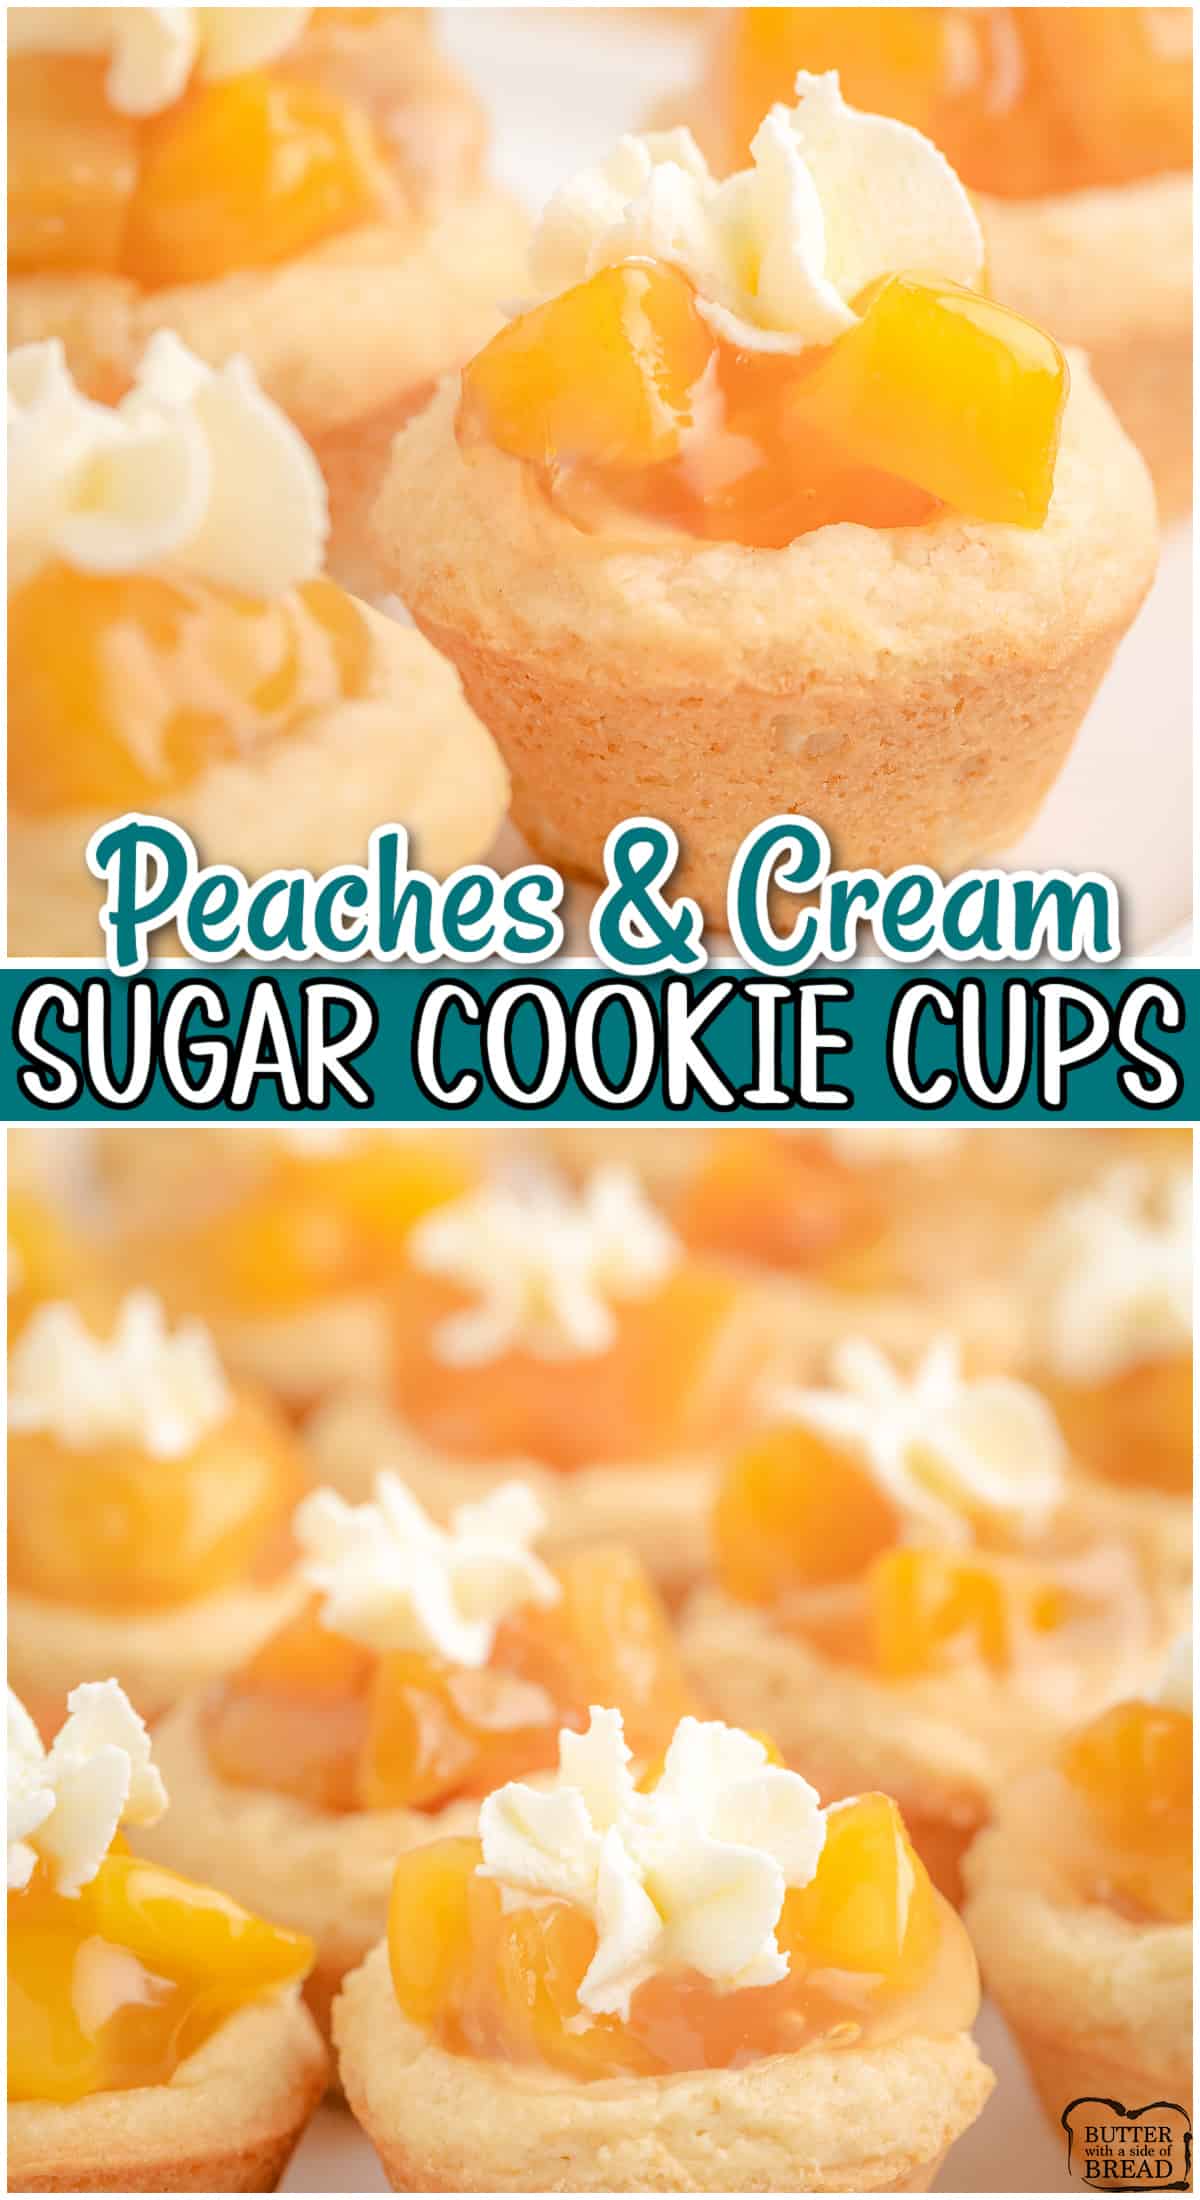 Peaches and Cream Cookie Cups made with buttery sugar cookie dough baked & filled with tangy peaches & topped with sweet cream. Delightful peach cookies everyone loves!